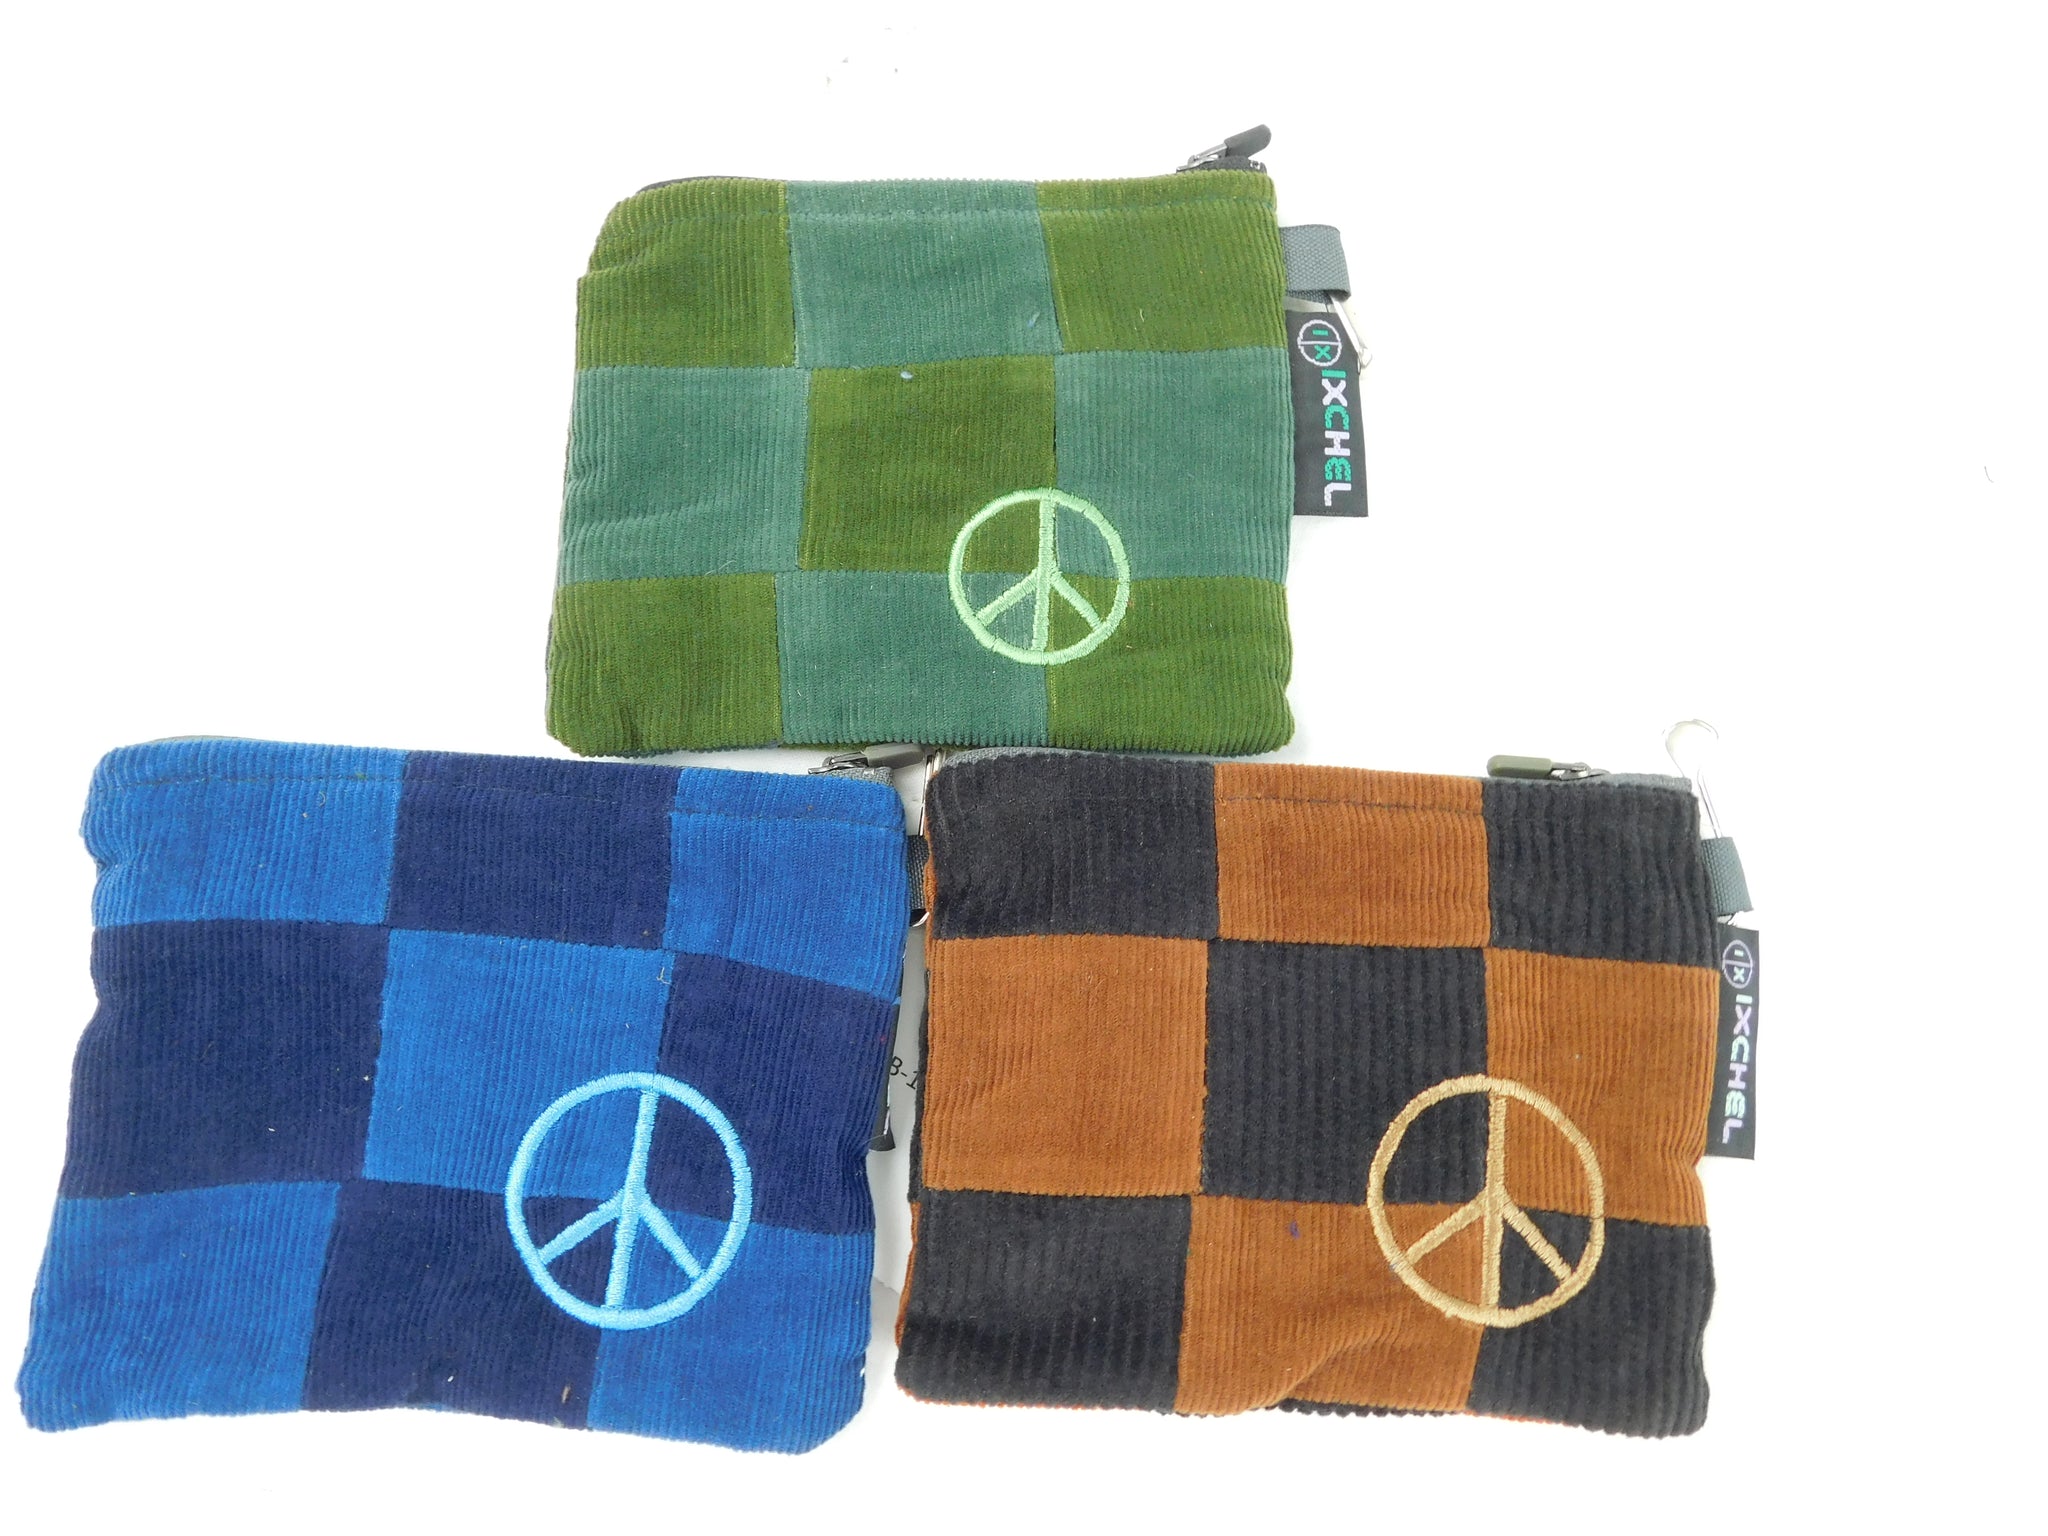 Patchwork zipper change purse with peace sign